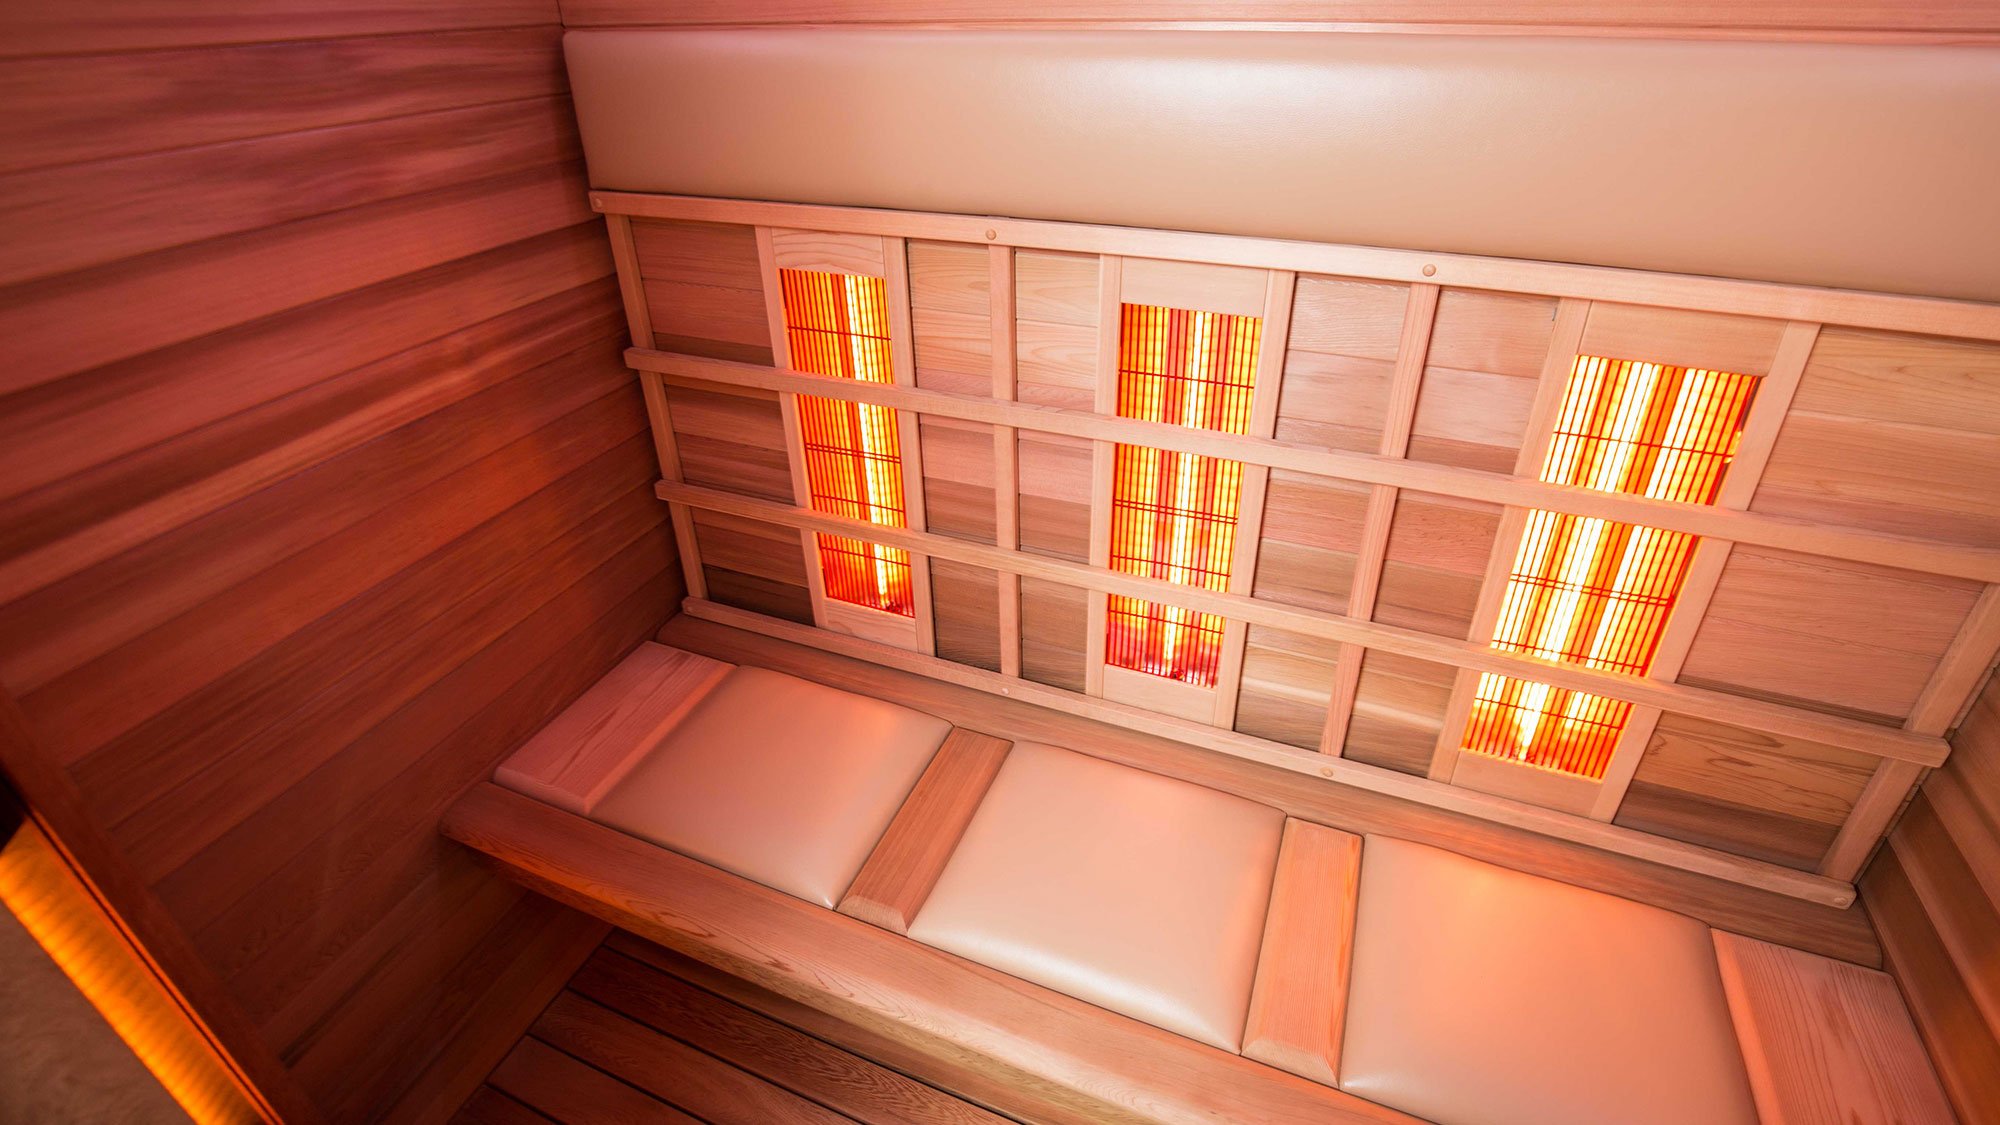 Infrared Saunas Prove To Be Hot Stuff in the Health and Fitness World